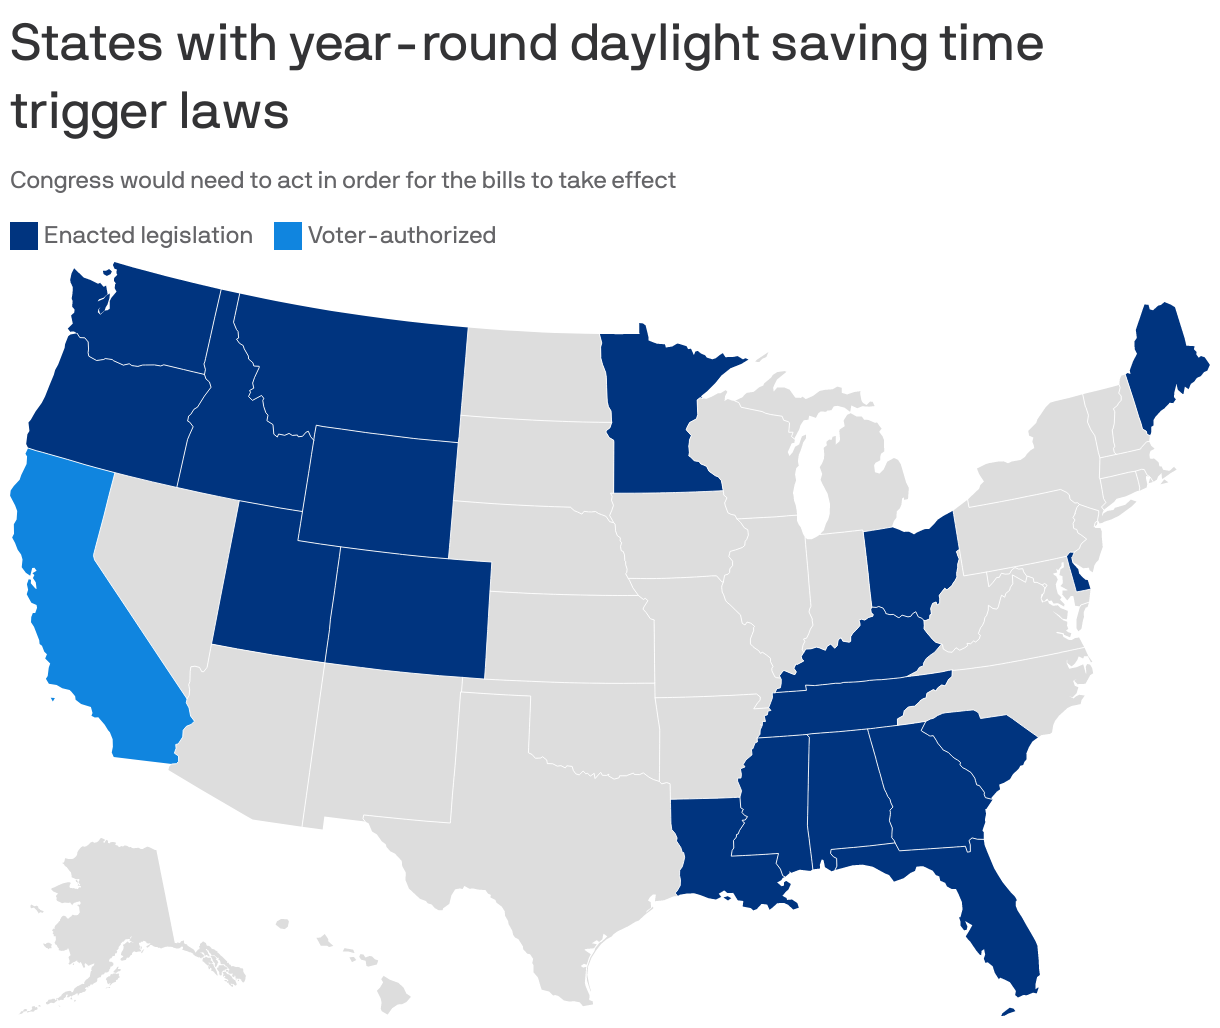 States with year-round daylight saving time trigger laws